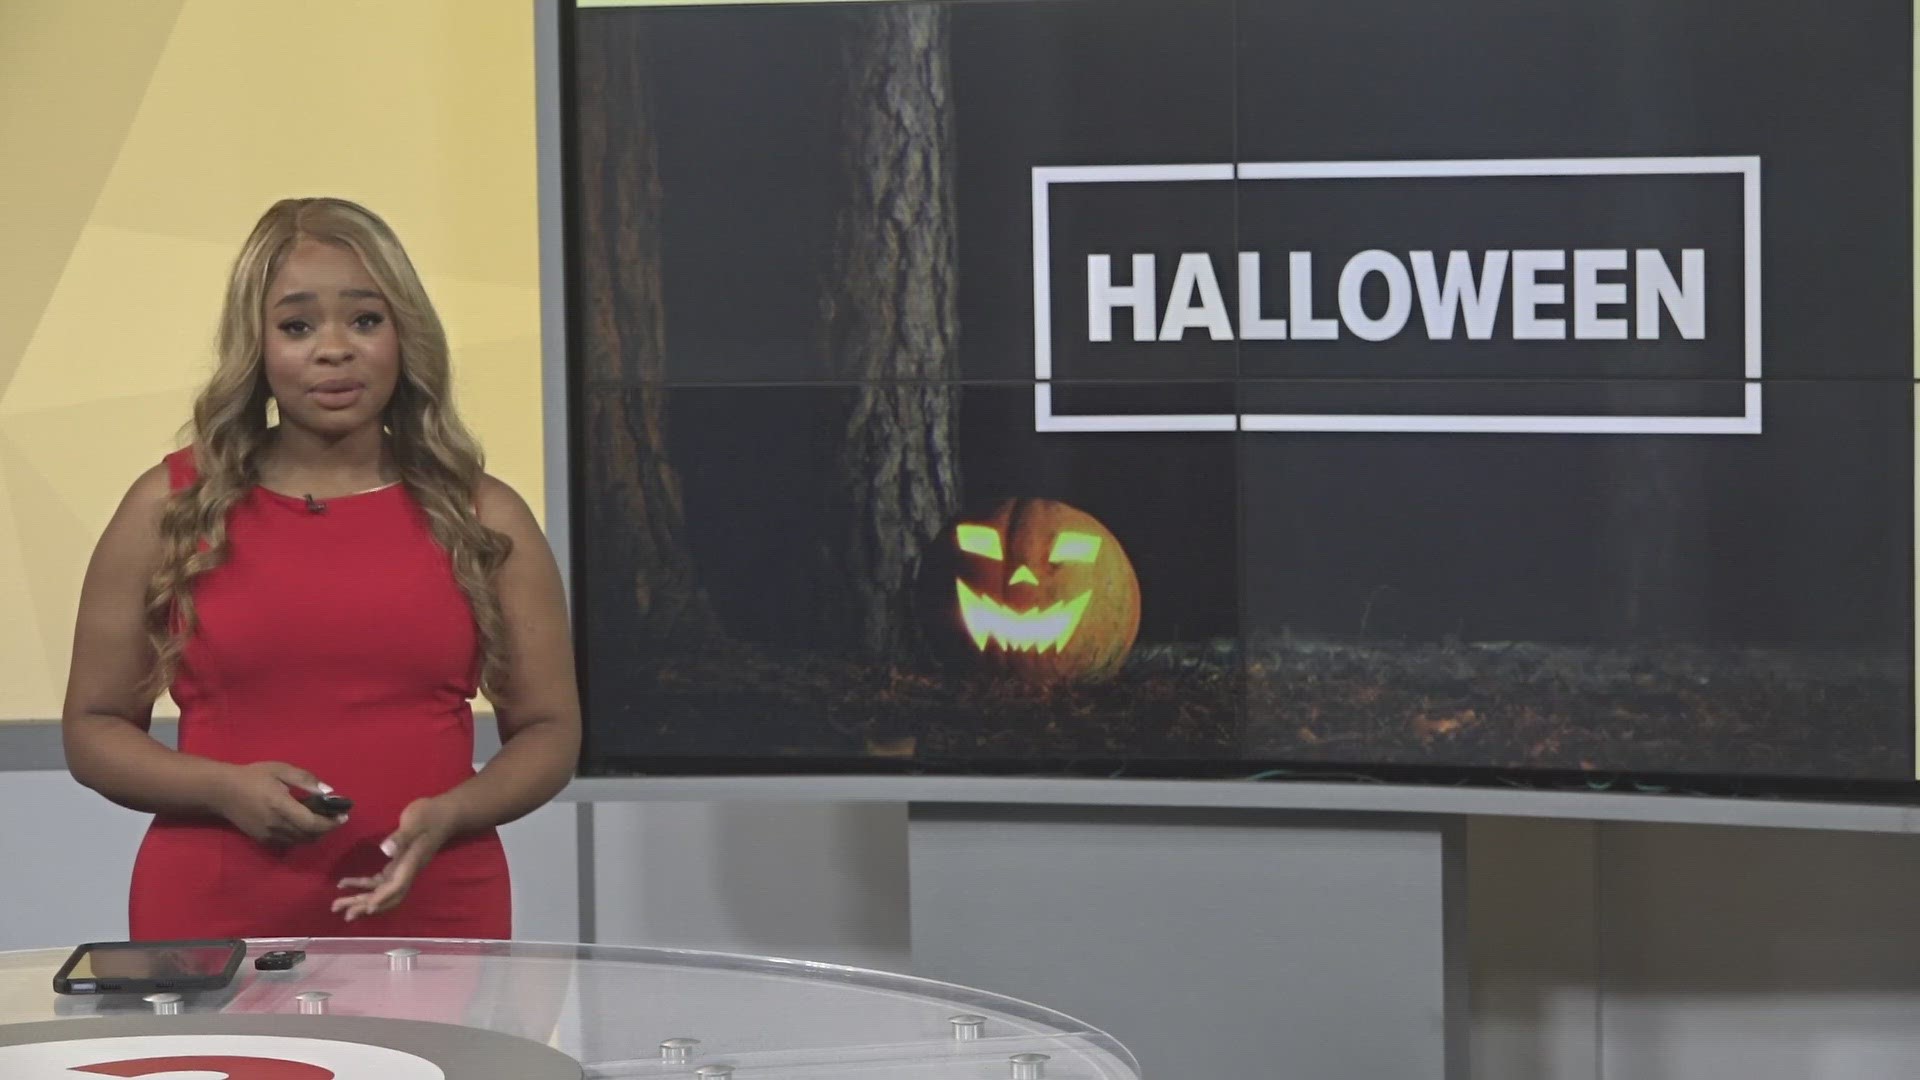 Blanca Cobb has advice on how to get kids used to some of the scary things around Halloween and other ways to have fun.